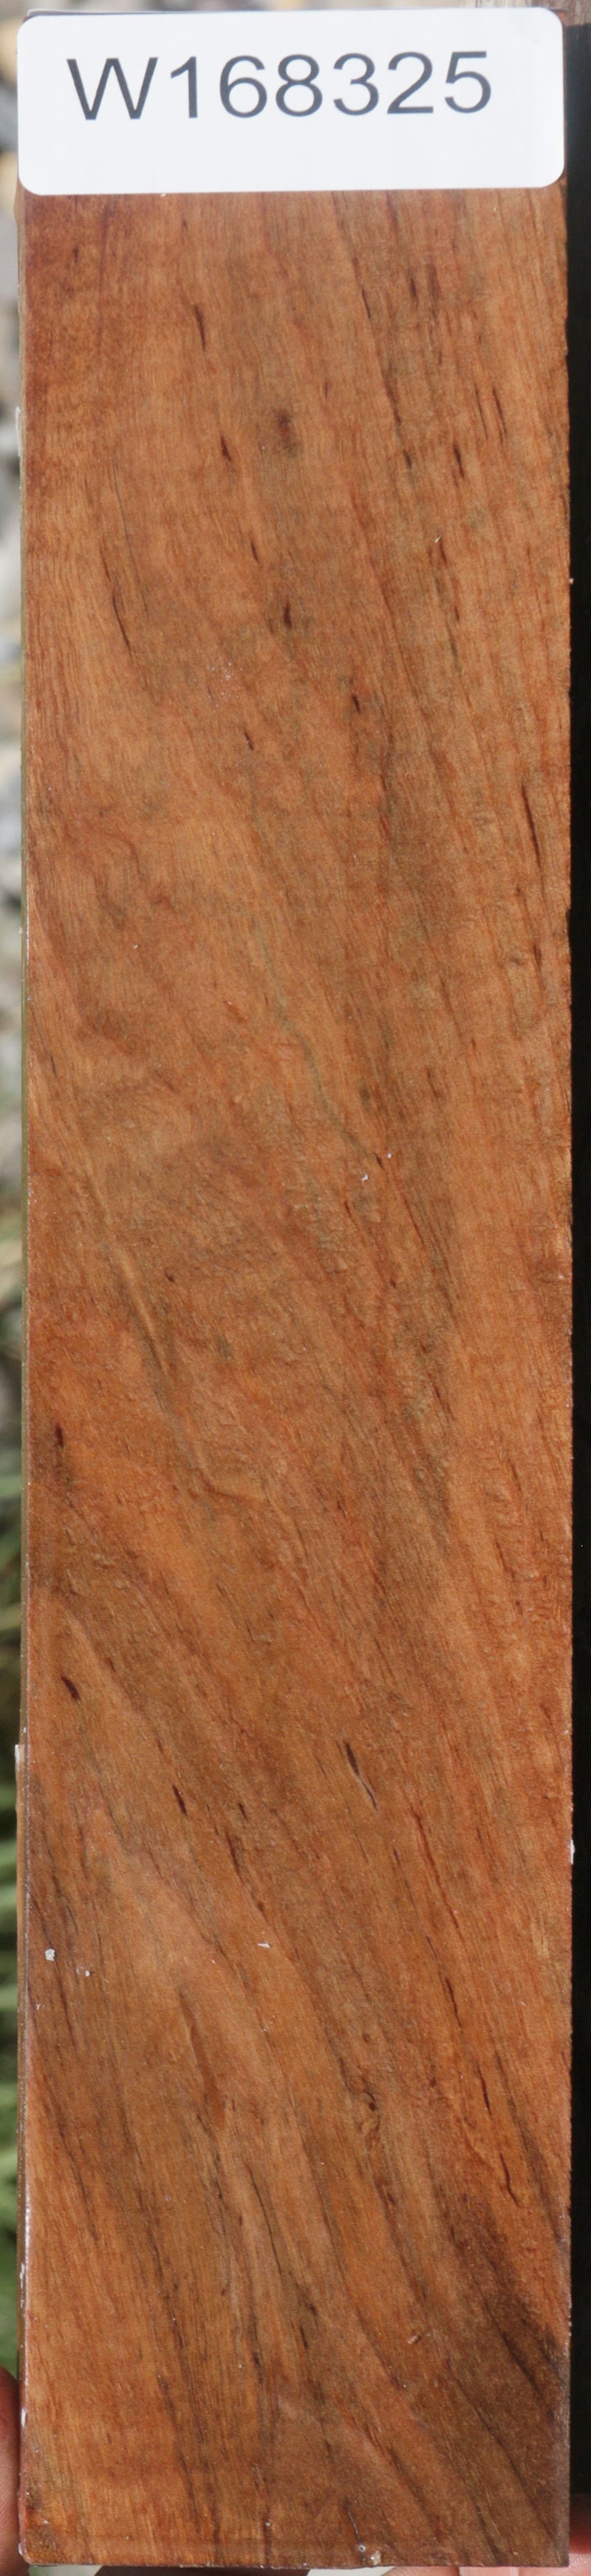 Extra Fancy Curly Pyinma Lumber